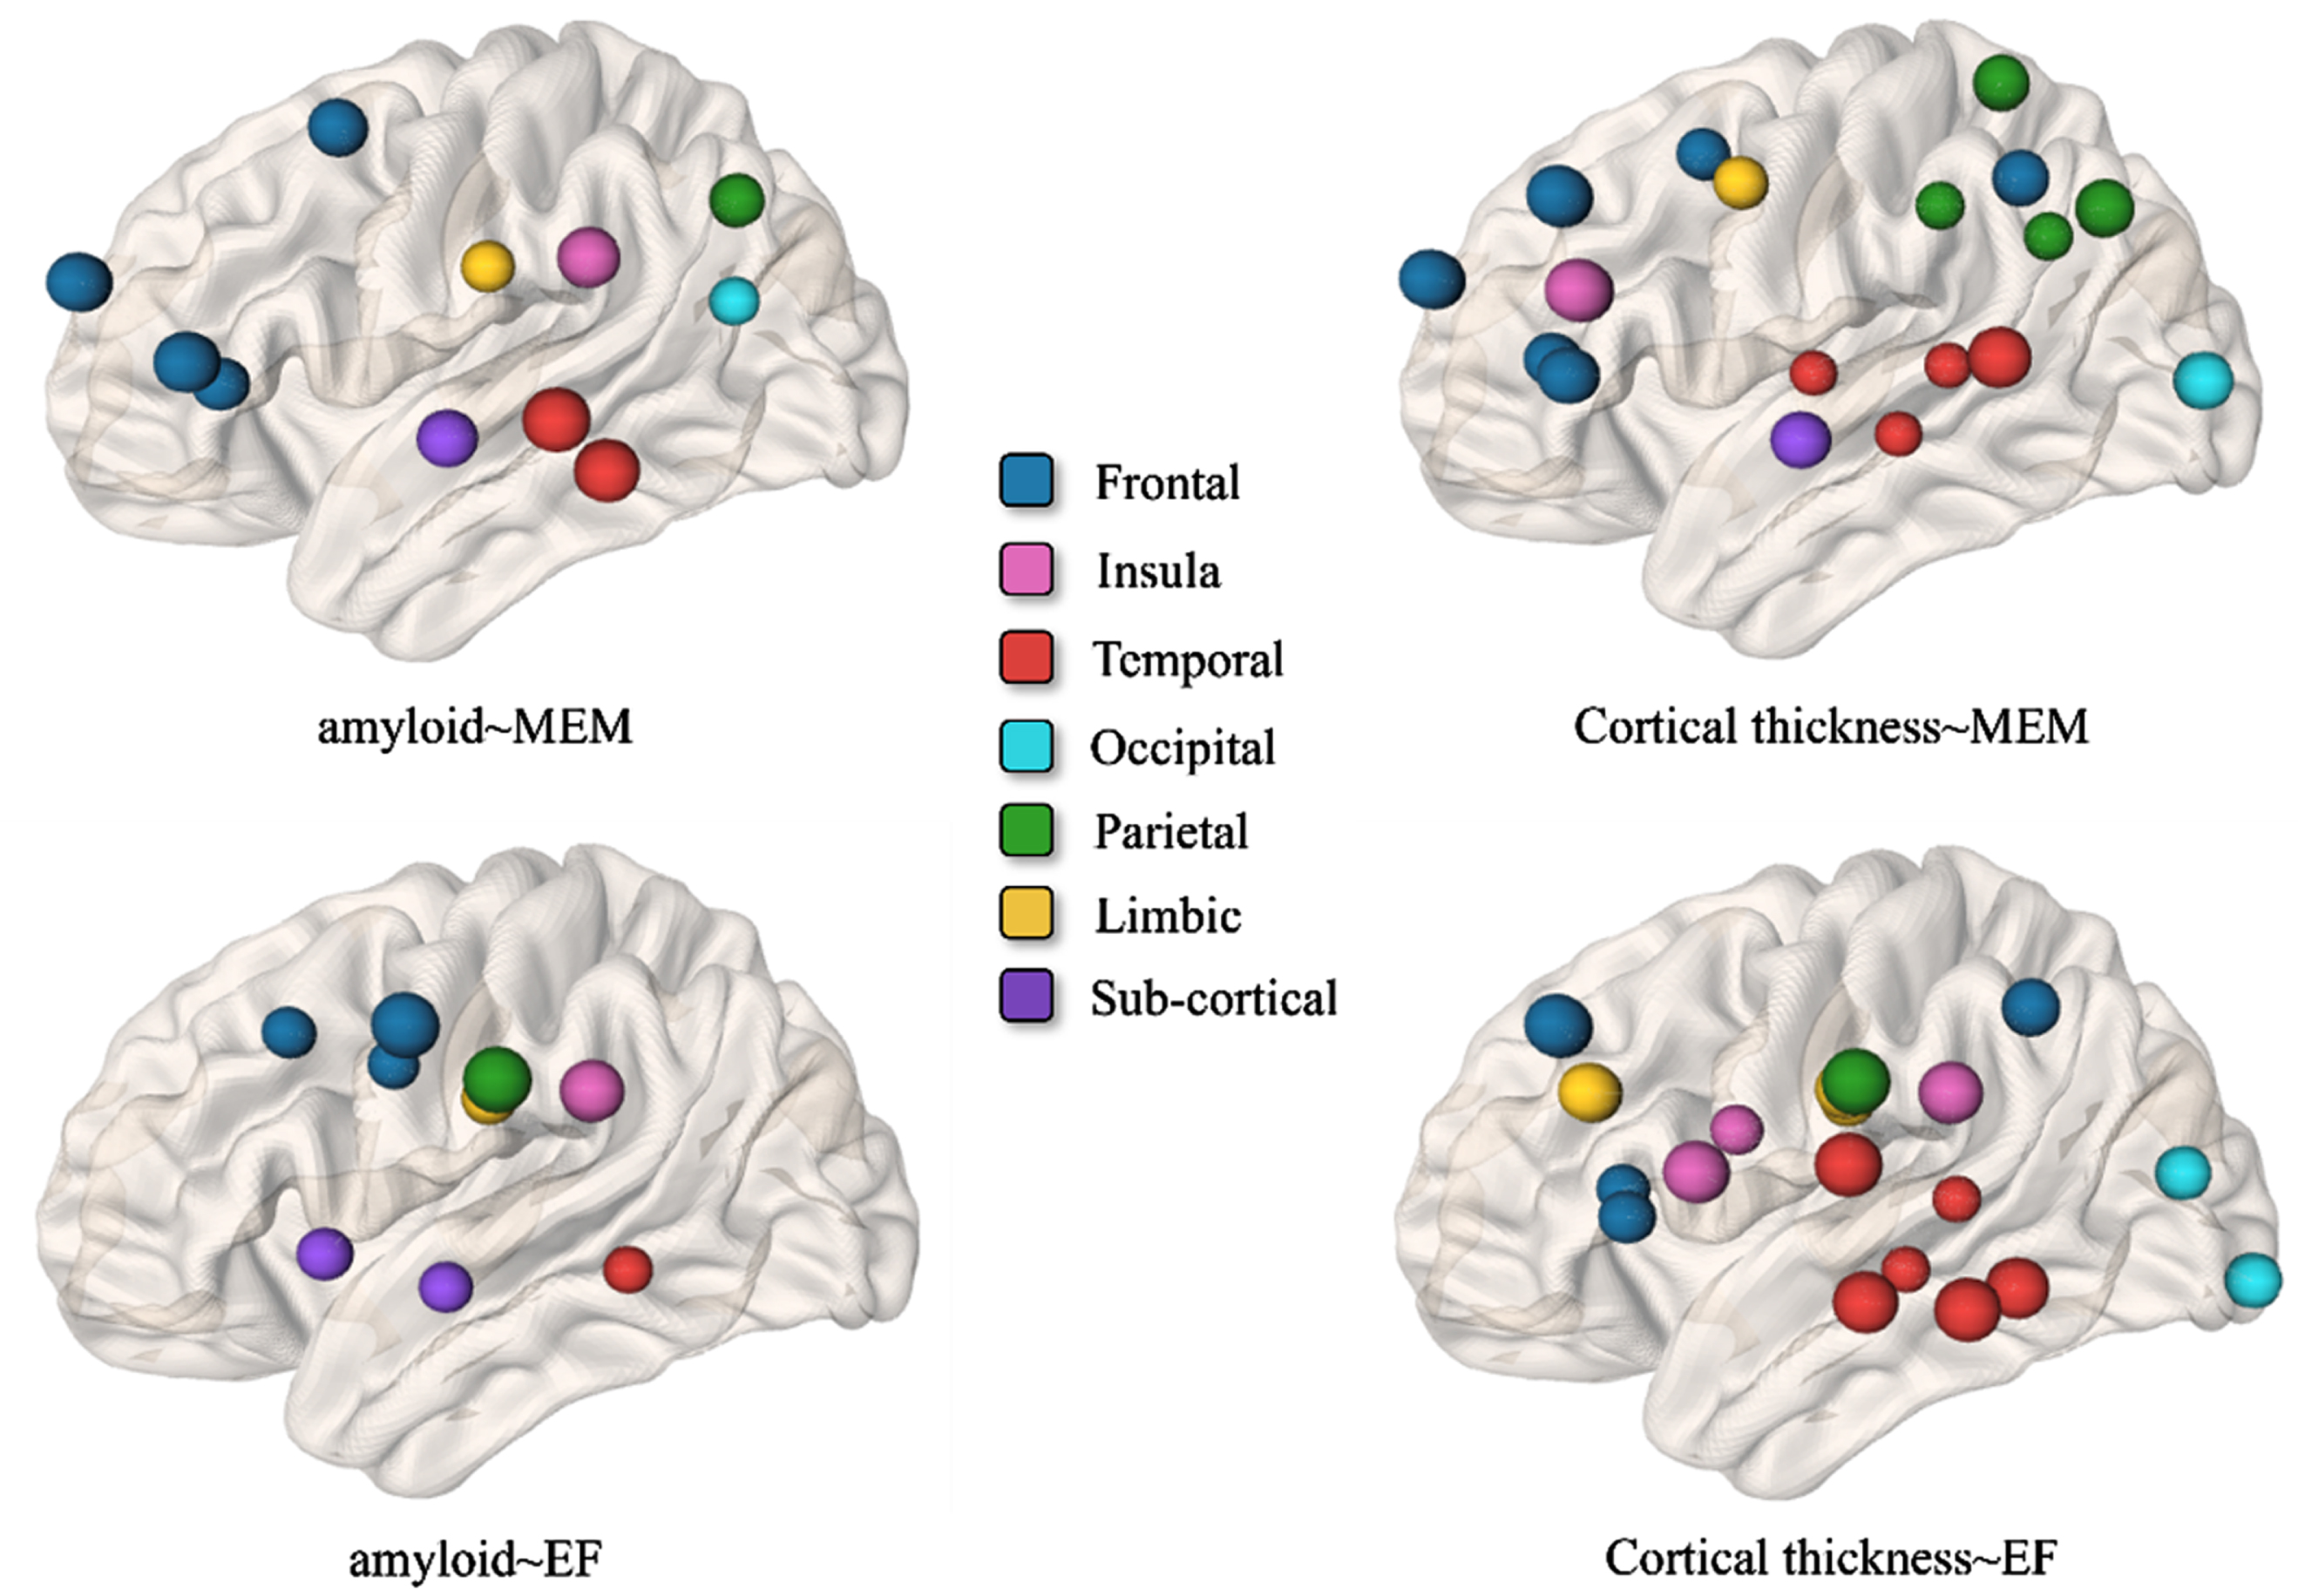 Brain regions survival after the variable selection method in the context of amyloid∼MEM relationship (top-left), cortical thickness∼MEM relationship (top-right), amyloid∼EF relationship (bottom∼left), and cortical thickness∼EF relationship (bottom right). The color indicates the anatomical lobe parcellation.